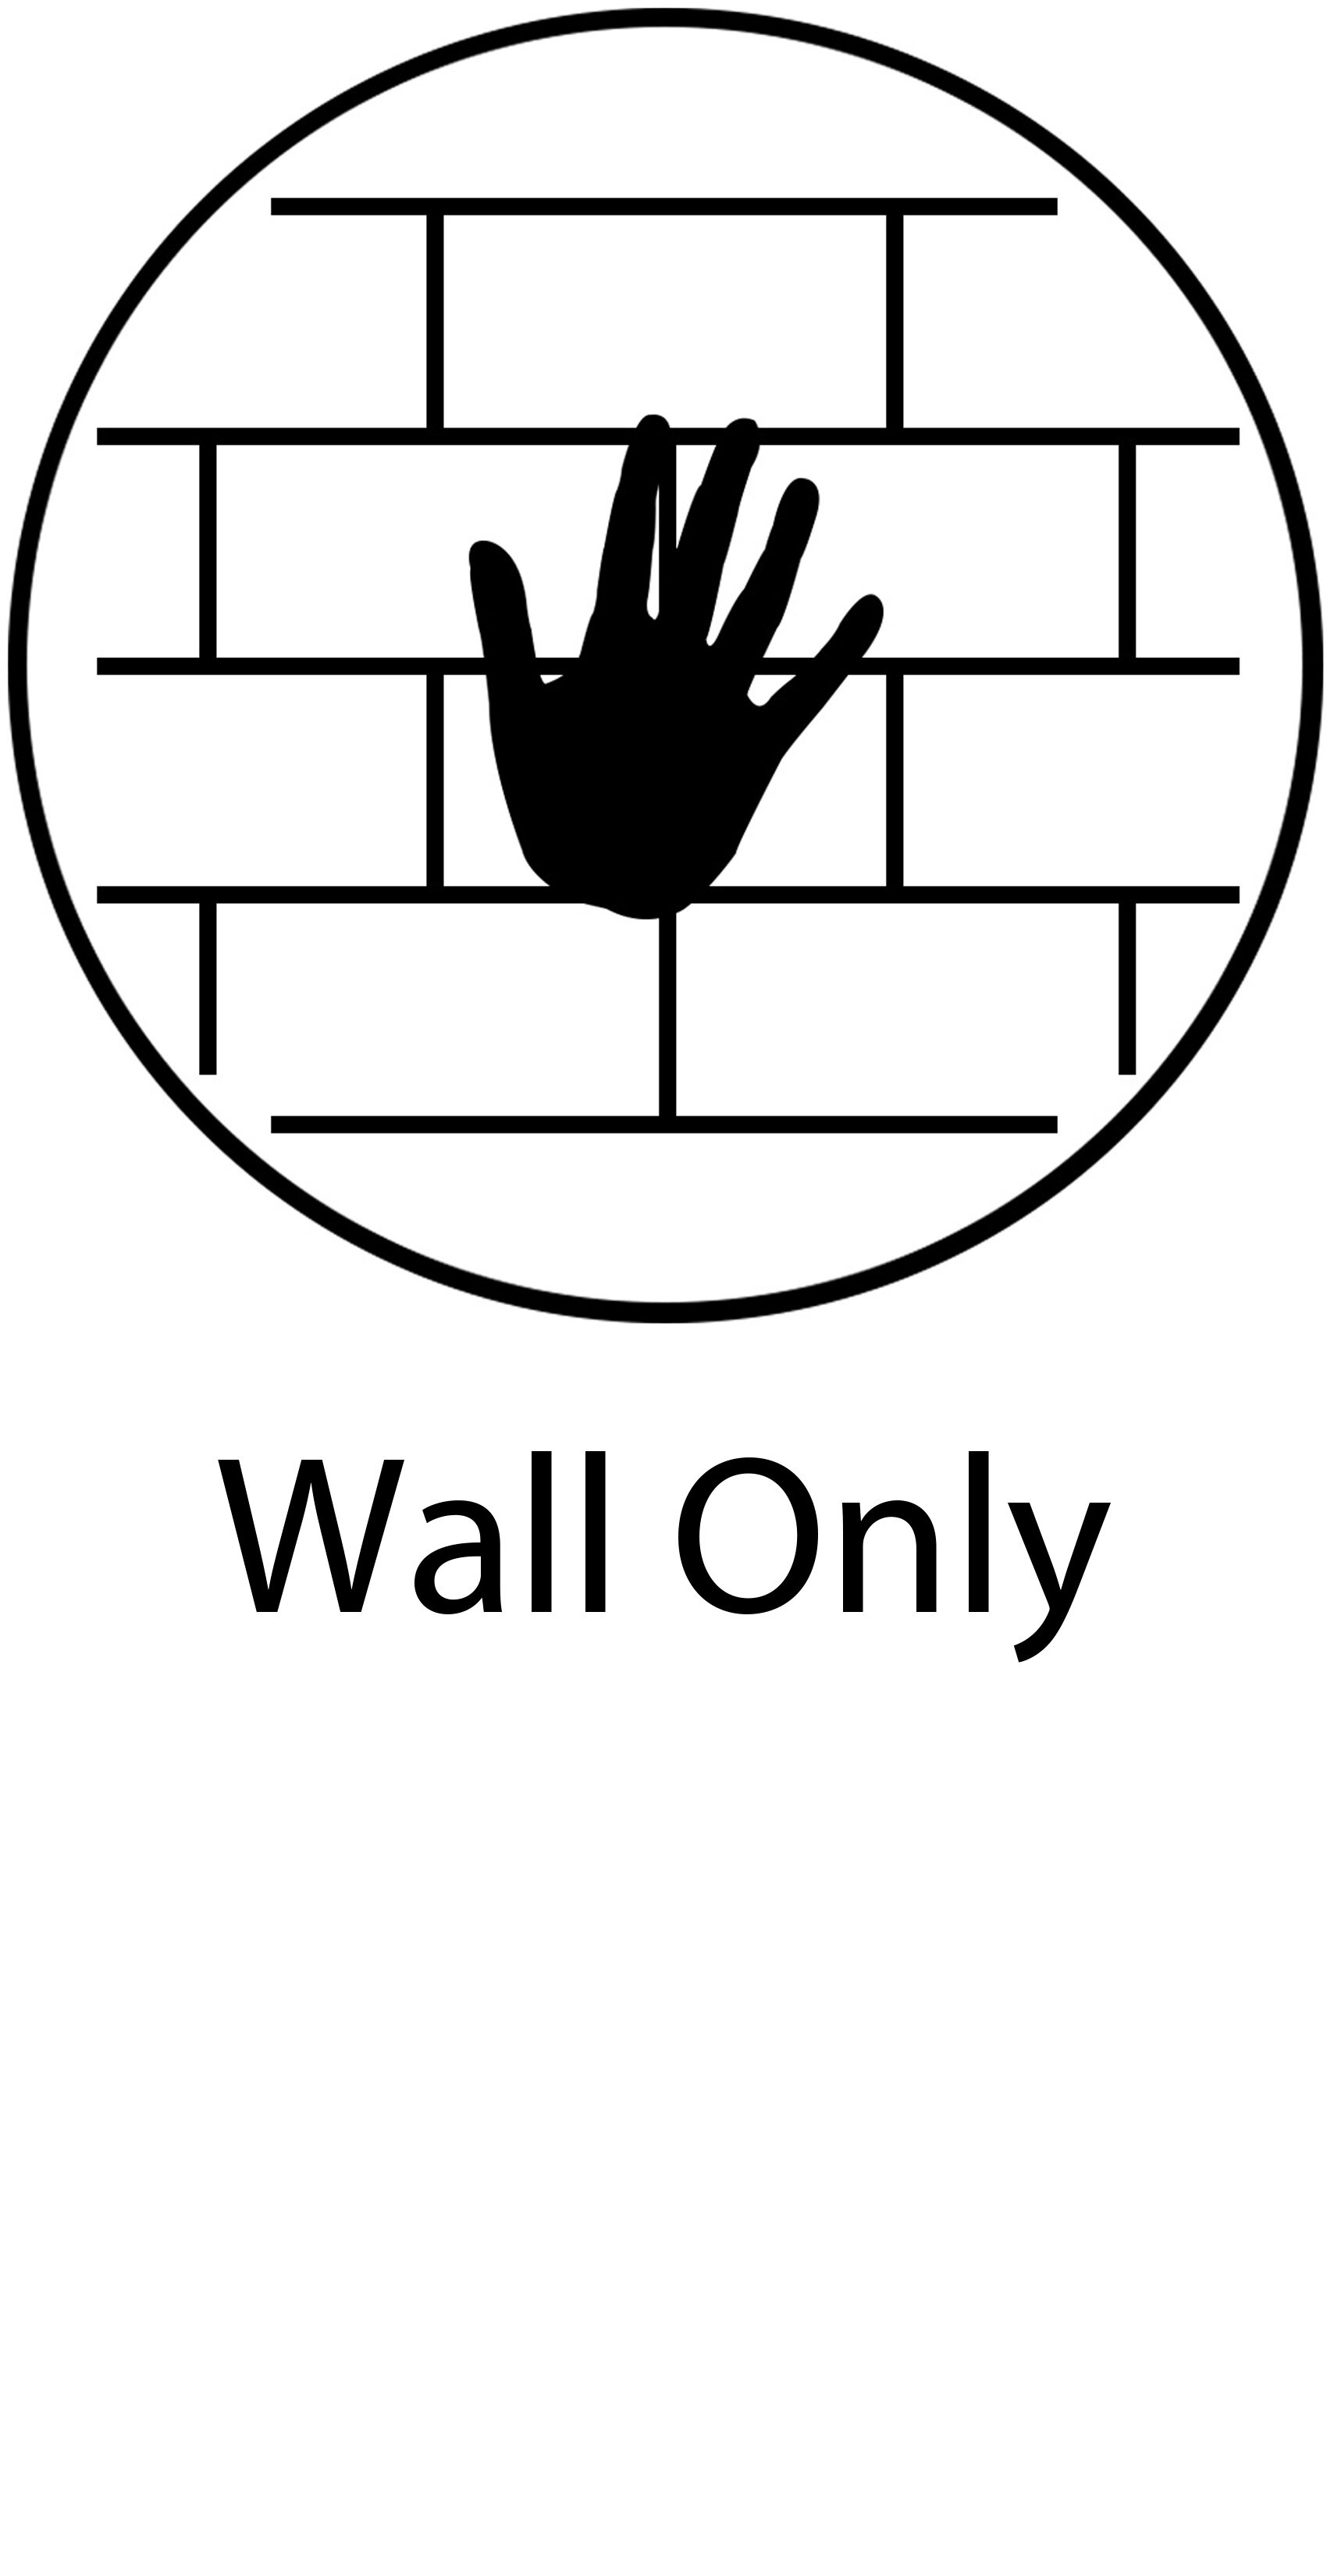 04 Wall only.jpg